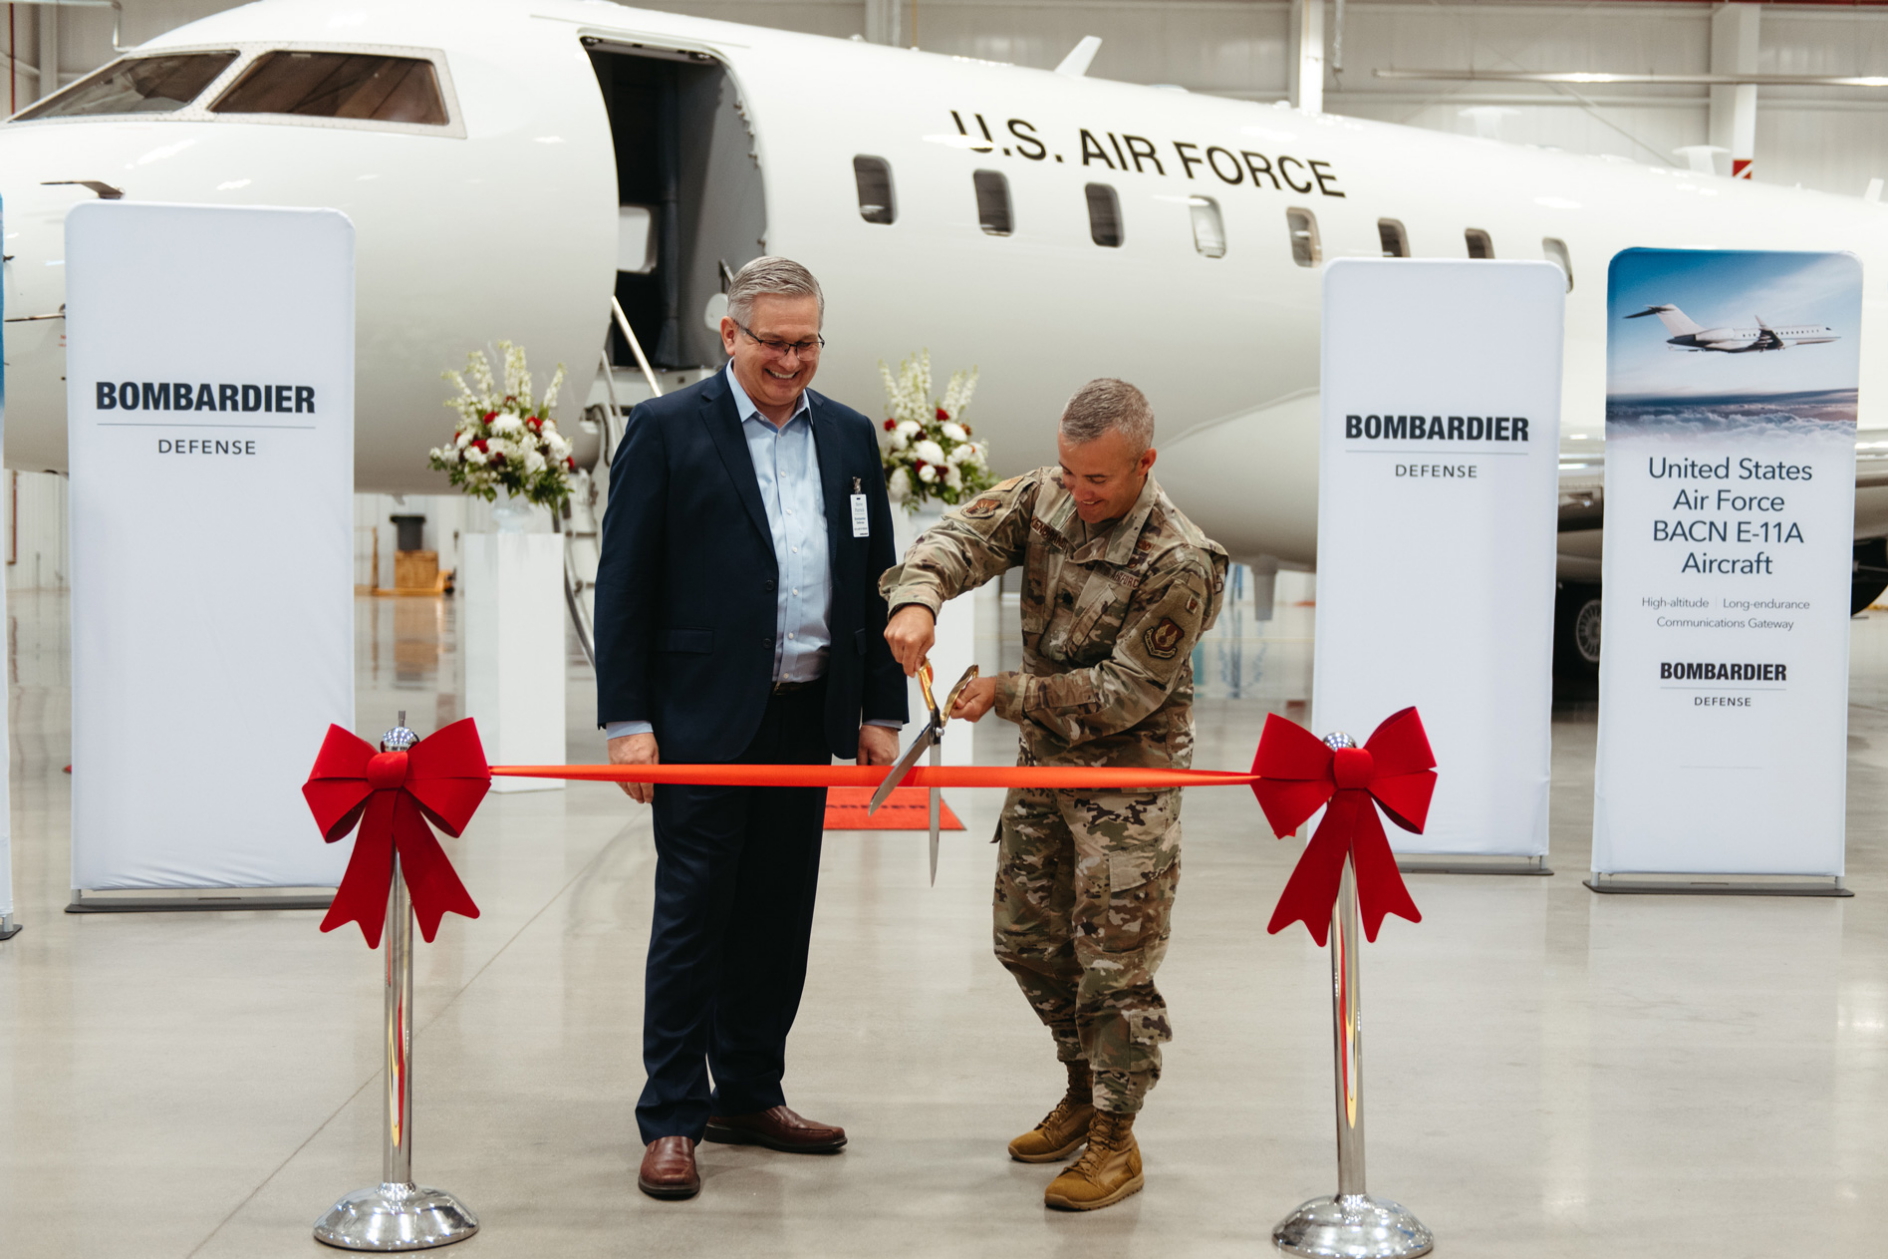 U.S. Air Force takes delivery of Bombardier Global 6000 aircraft. Click to enlarge.